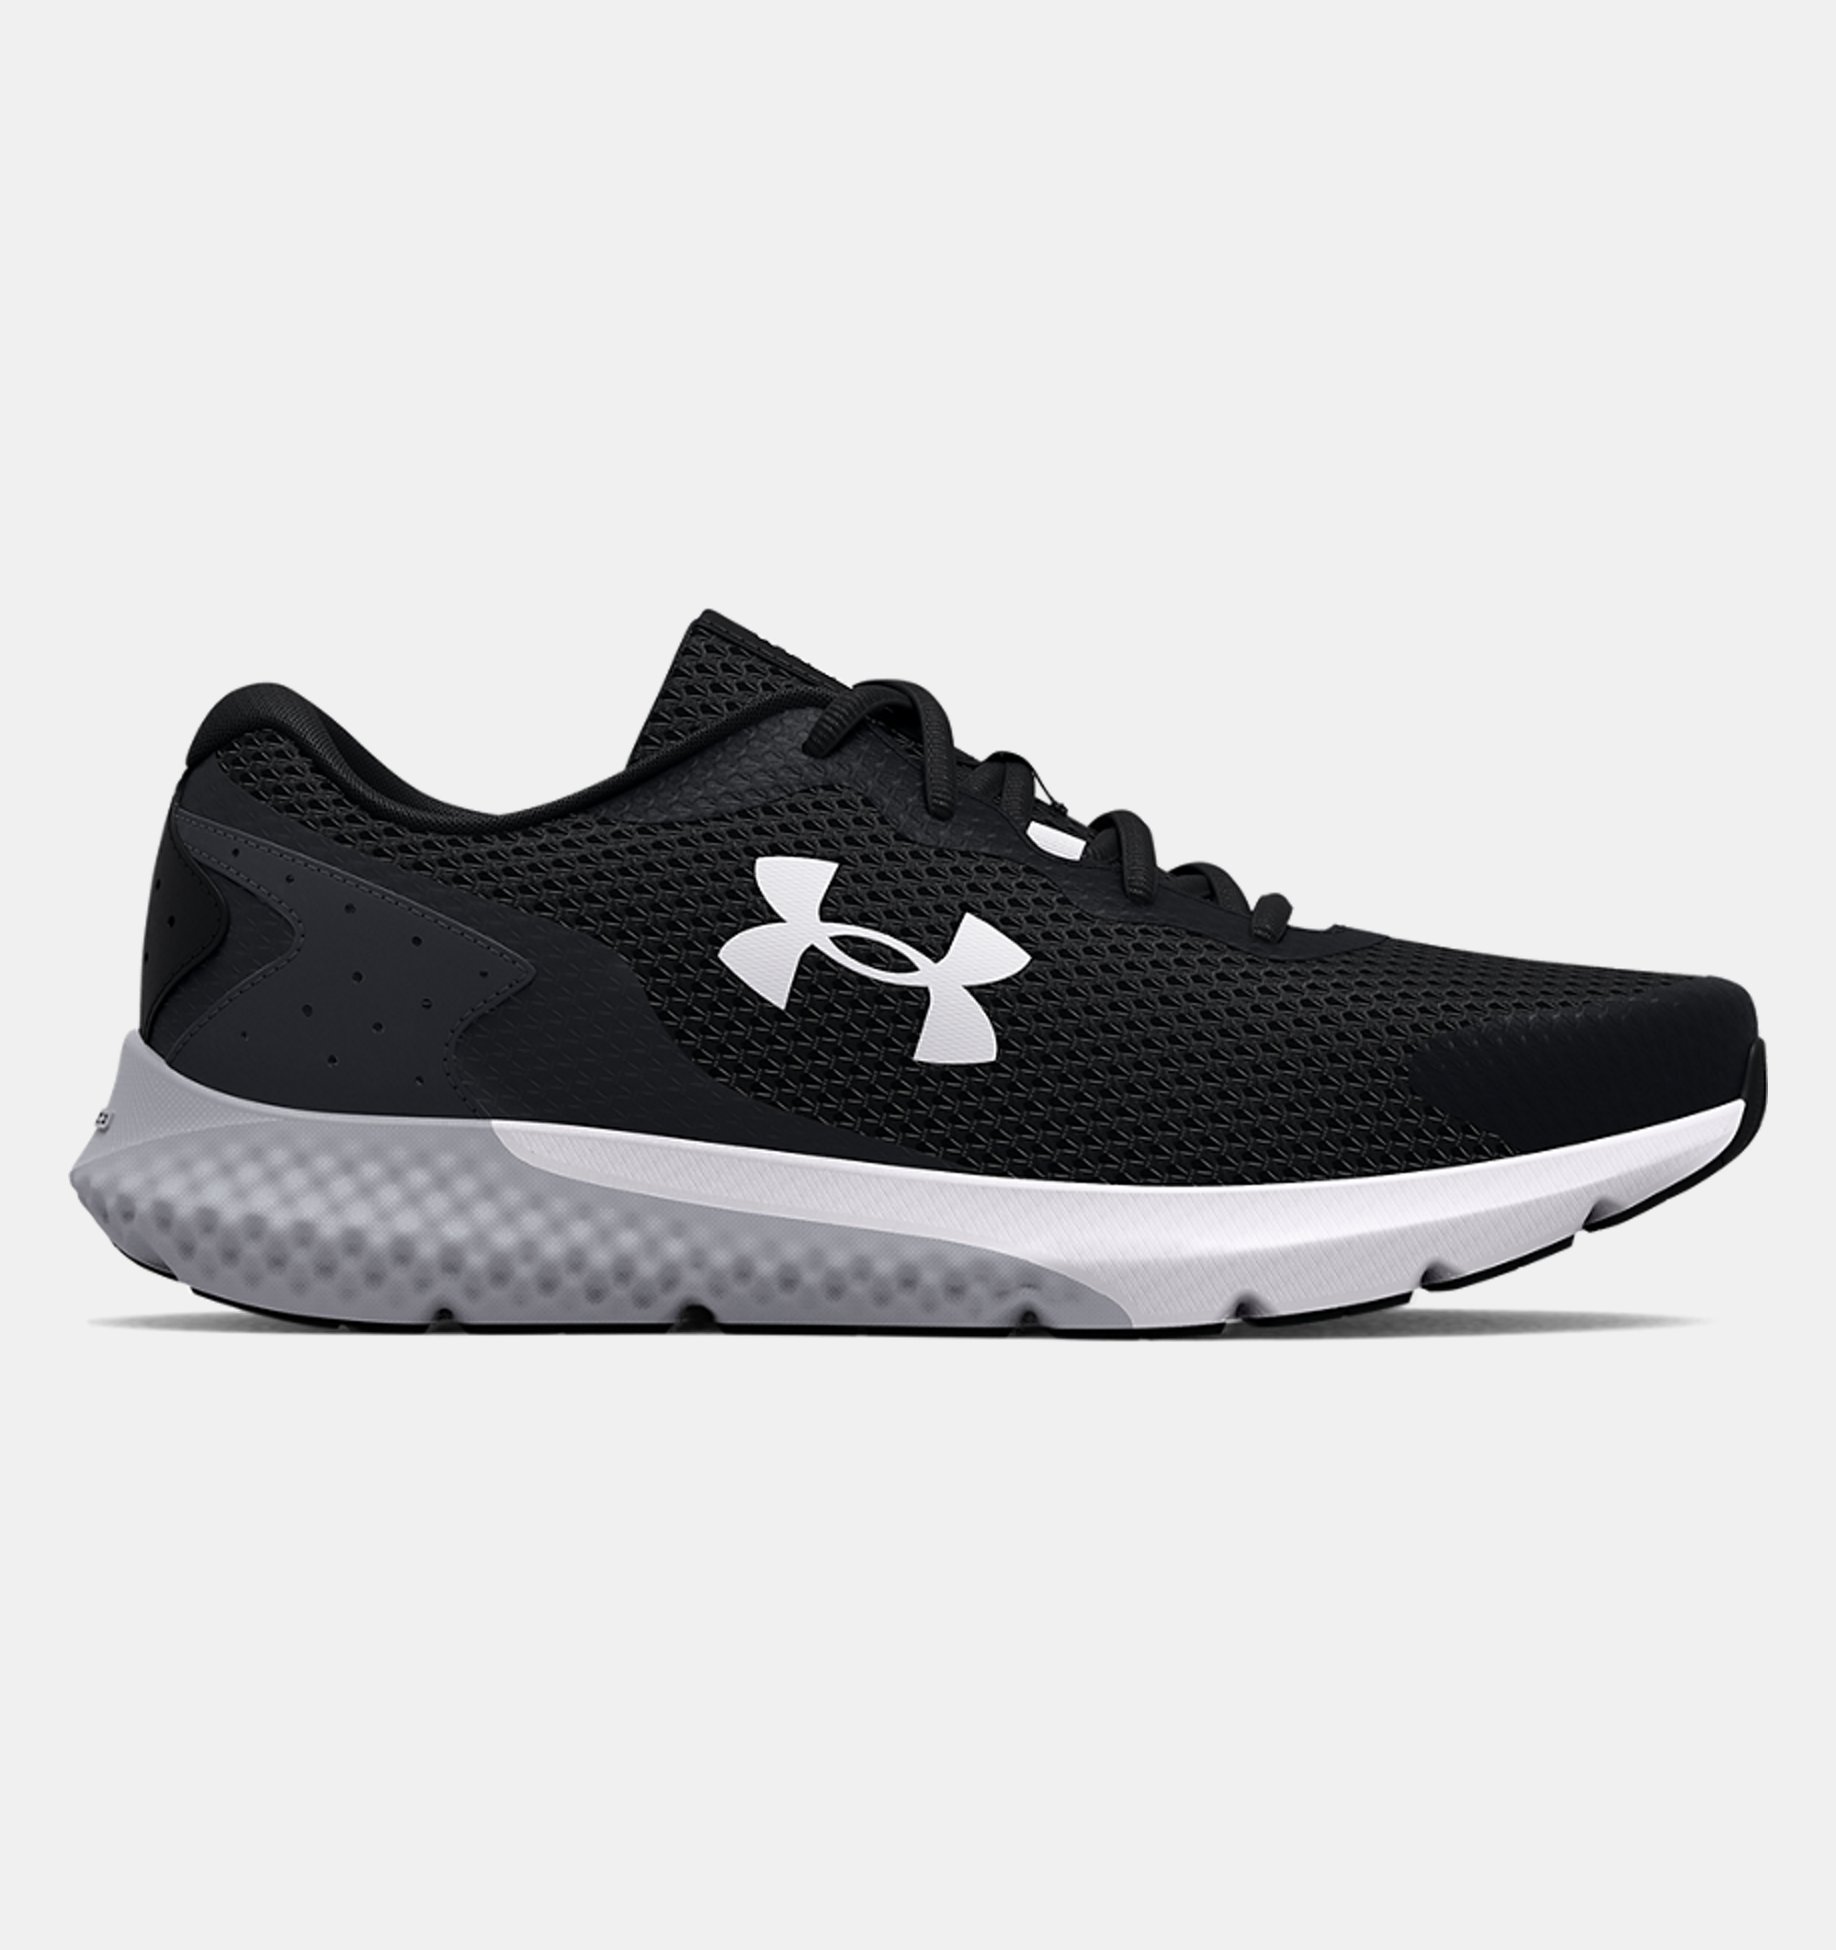 Under Armour Mens Charged Rogue Running Shoe 